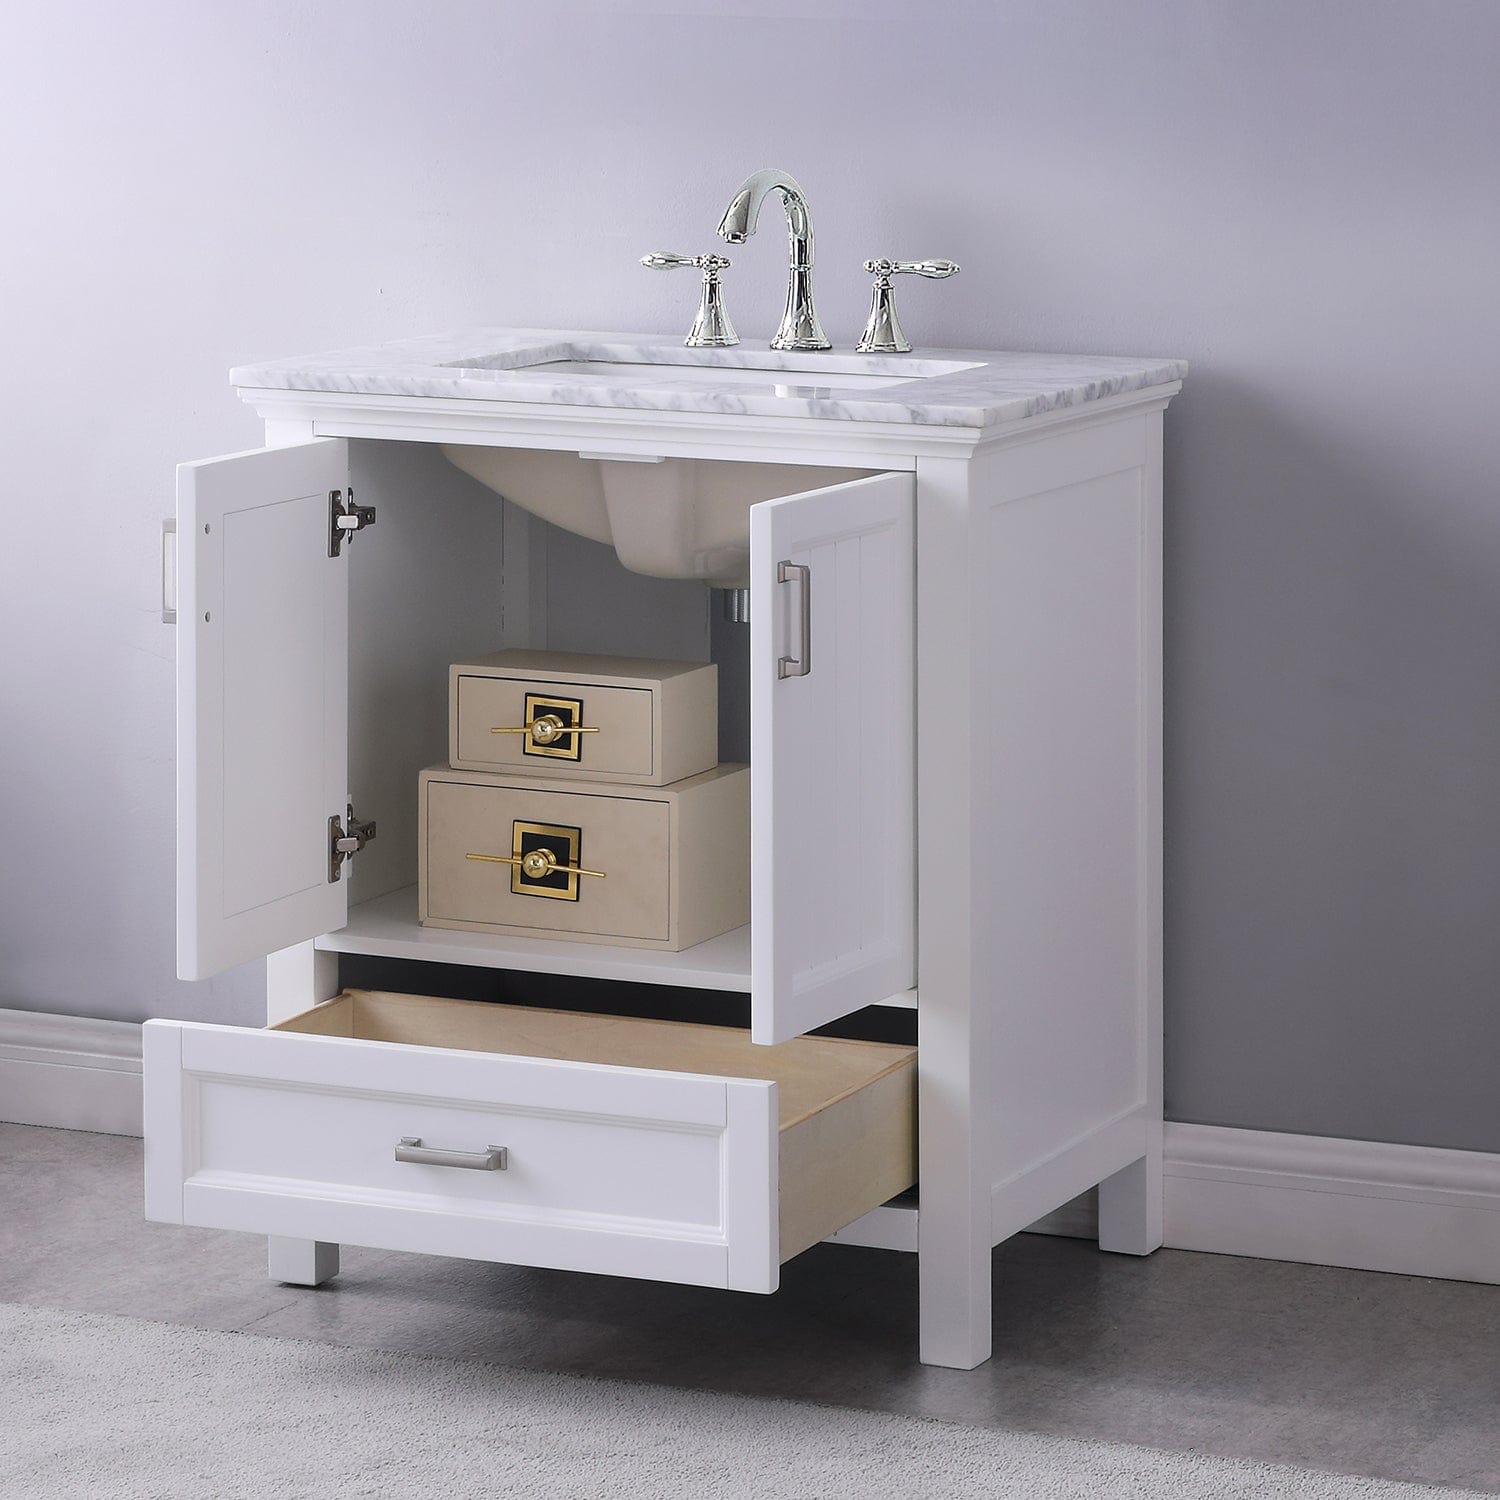 Altair Isla 30" Single Bathroom Vanity Set in White and Carrara White Marble Countertop without Mirror 538030-WH-CA-NM - Molaix631112970761Vanity538030-WH-CA-NM